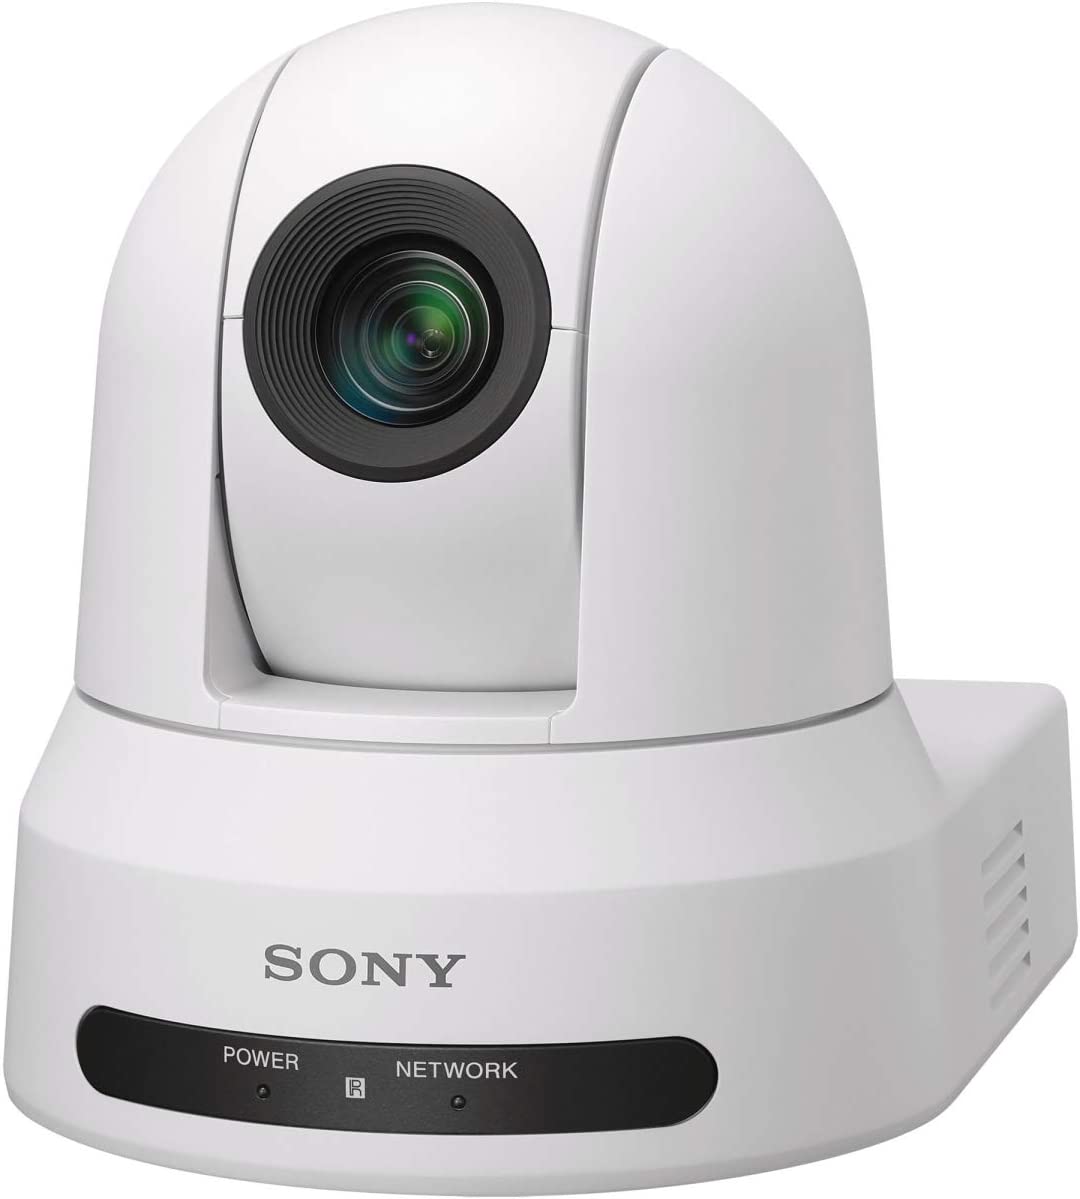 Sony SRG-X400 8.5 Megapixel Network Camera - H.264, H.265-3840 x 2160-20x Optical - Exmor R CMOS - HDMI - Ceiling Mount